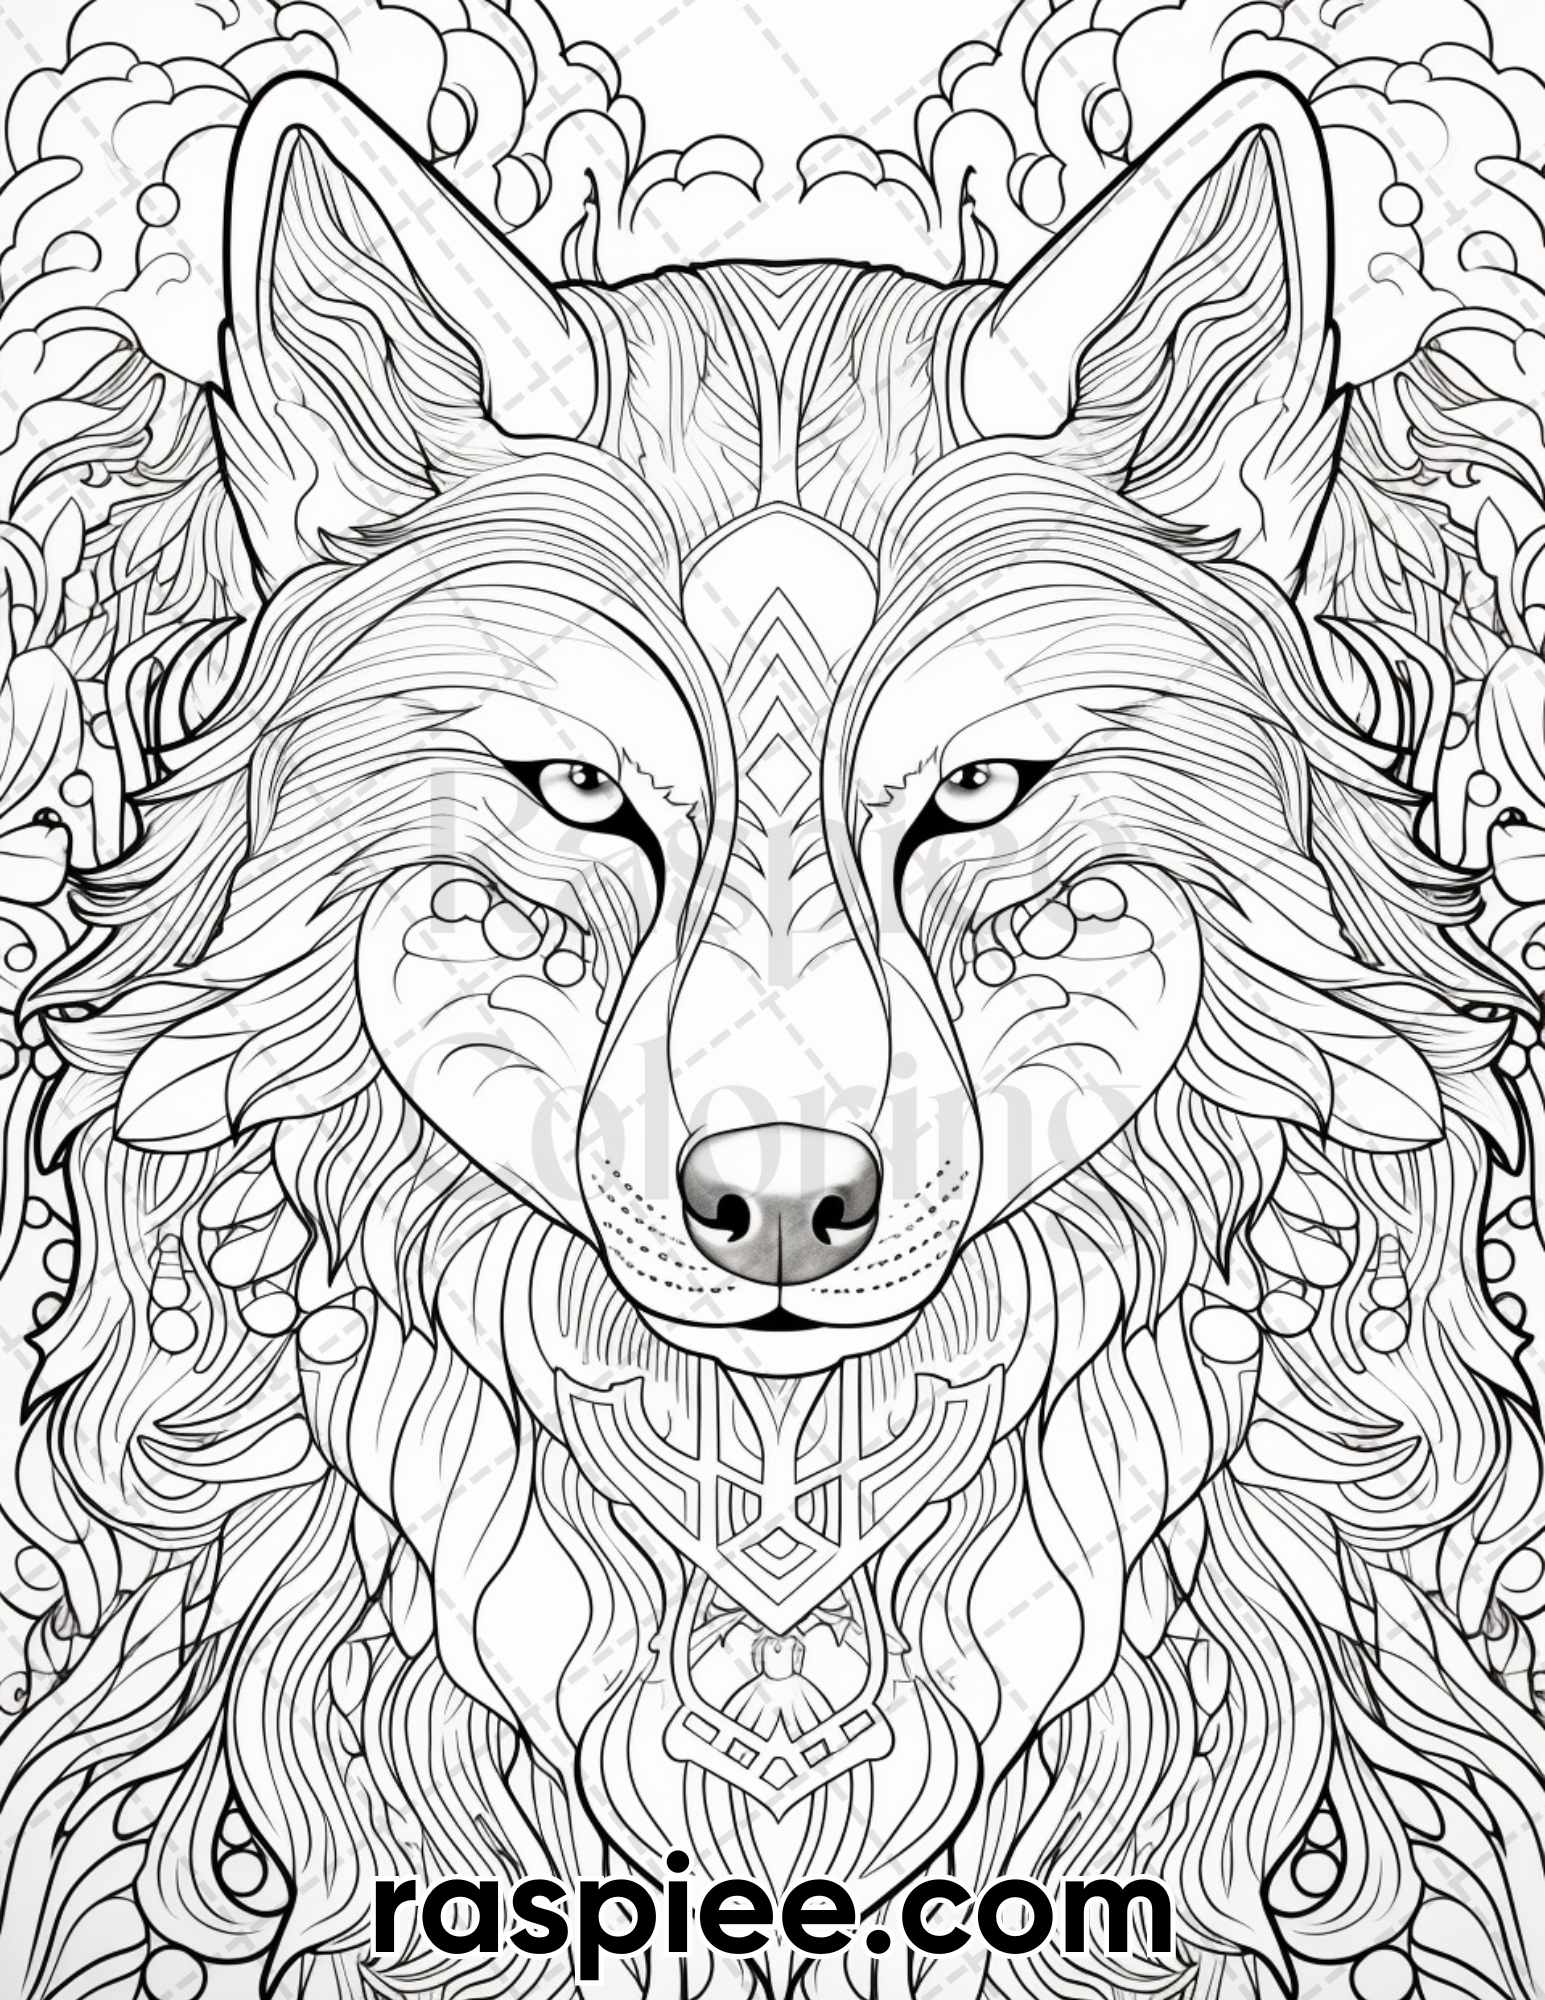 Winter wolf grayscale coloring pages for adults printable pdf inst â coloring